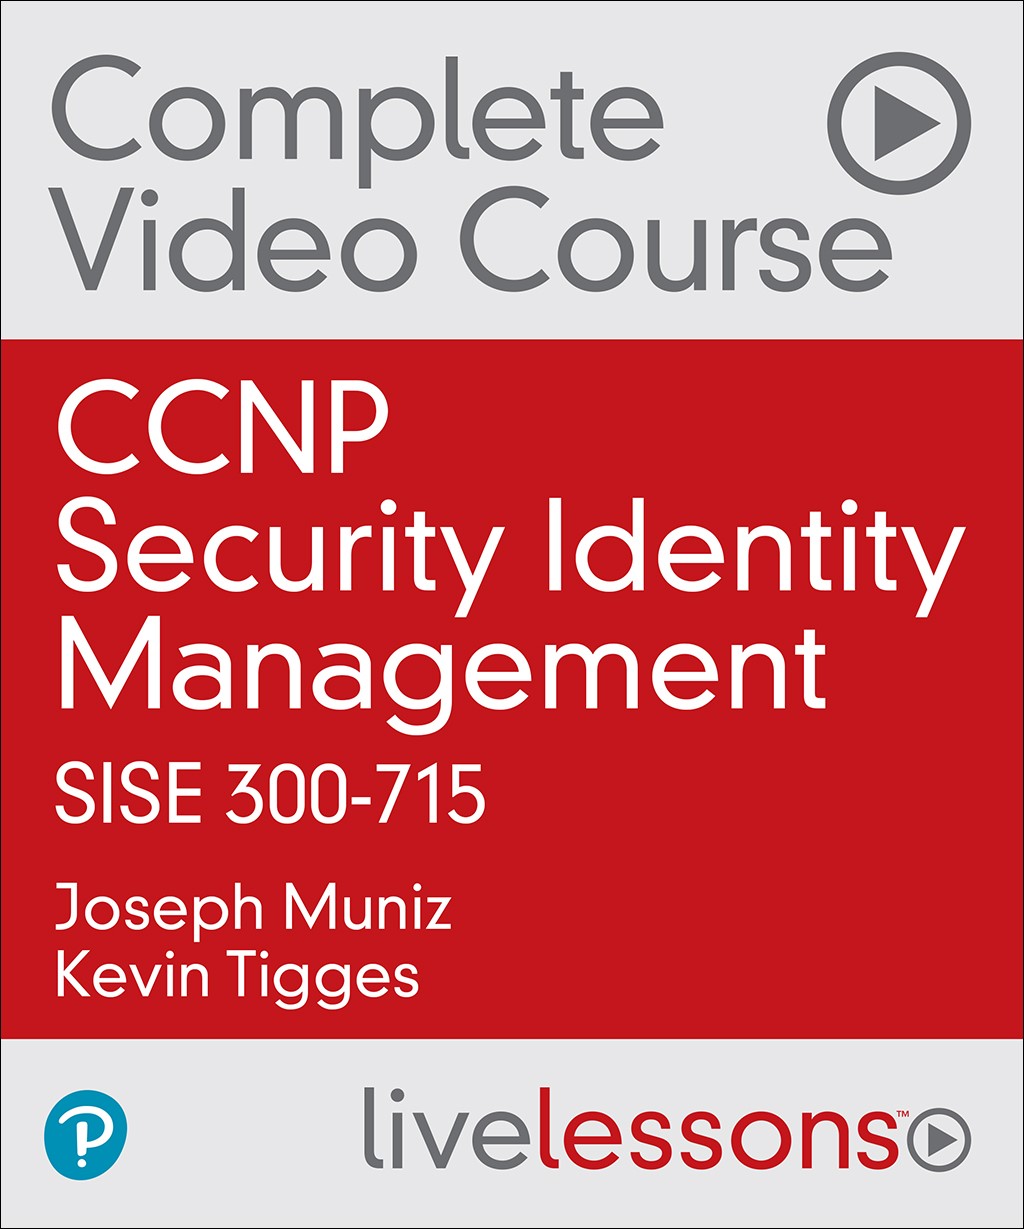 CCNP Security Cisco Identity Services Engine SISE 300-715 Complete Video Course (Video Training)